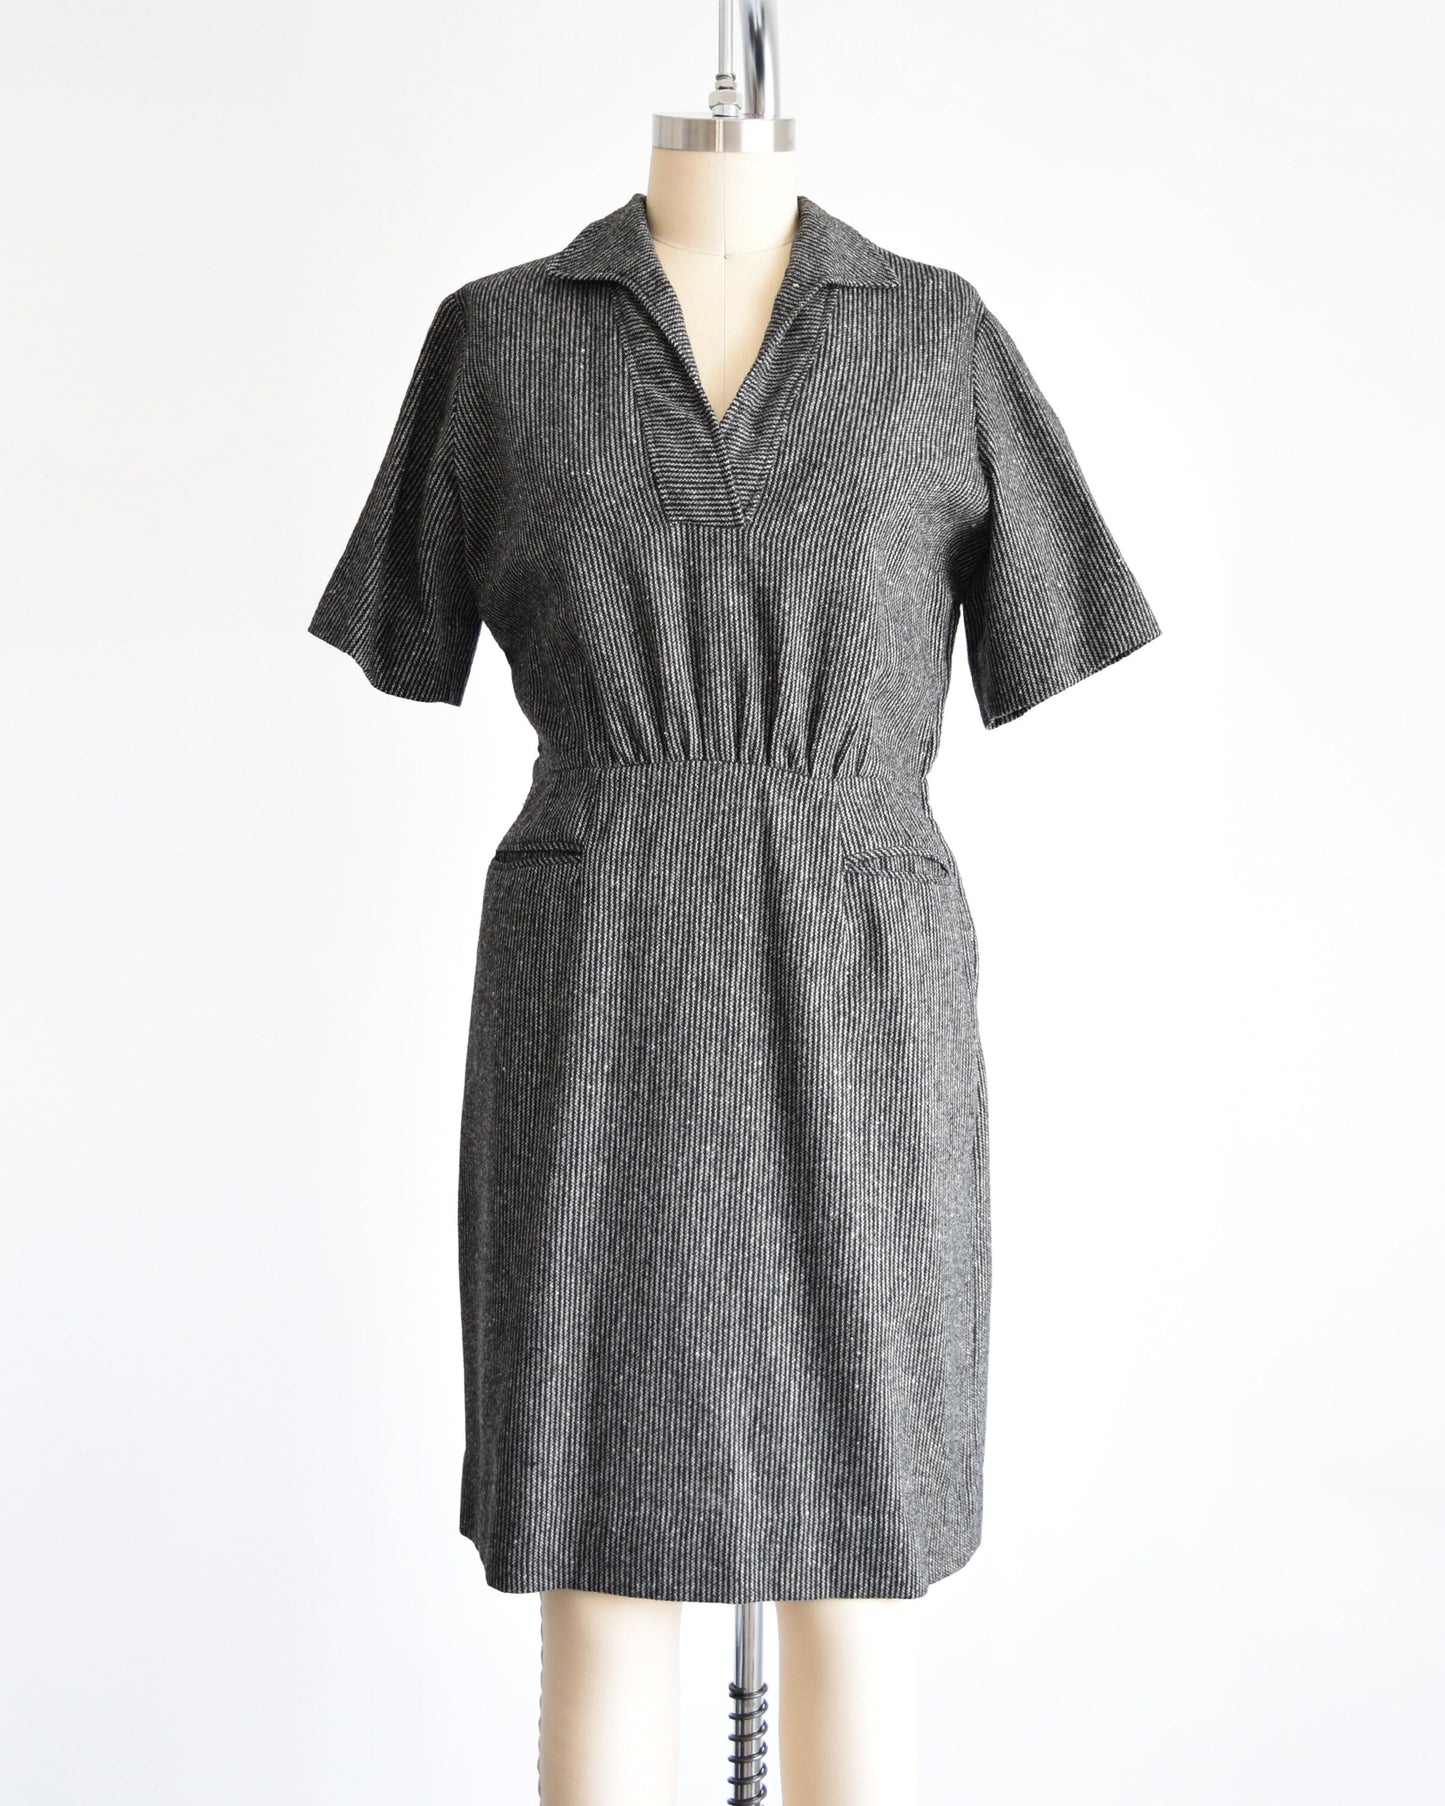 A 1950s vintage wool dress that is black and white striped with a v-neck collared neckline, short sleeves, fitted waist, and two front pockets below the waist. Dress is on a dress form